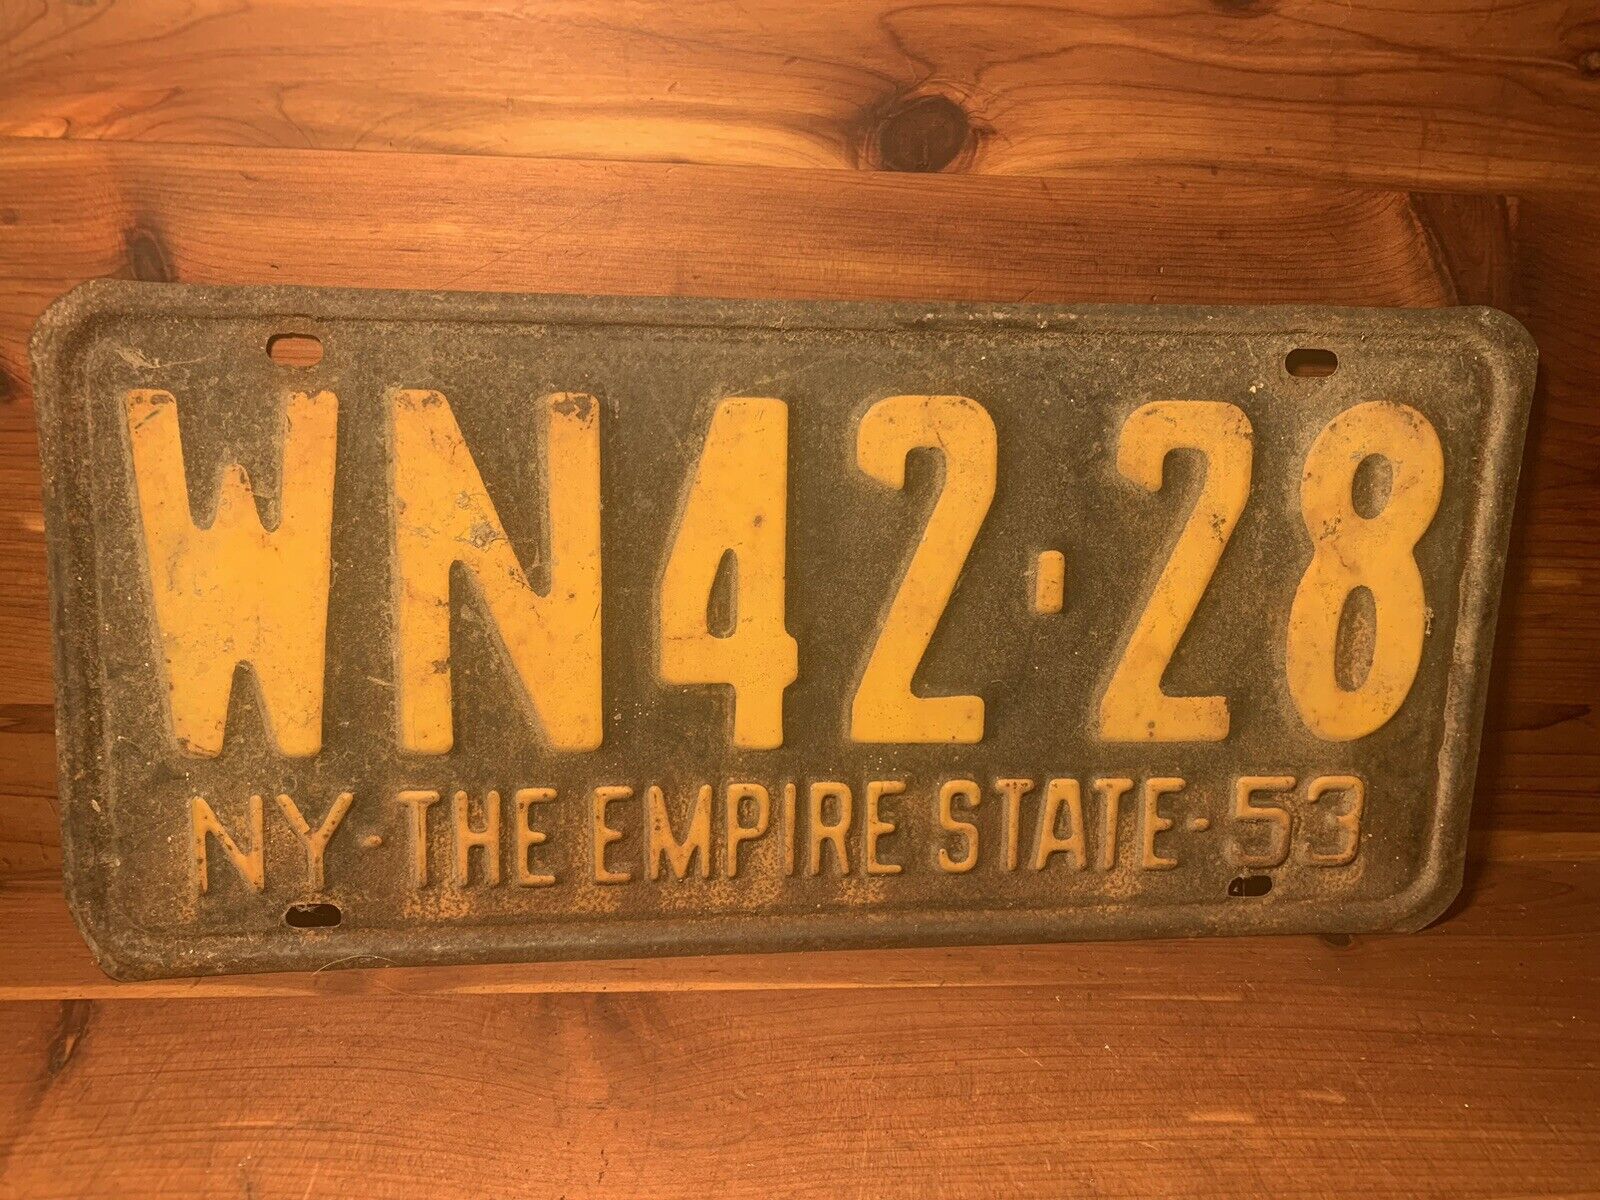 Vintage WN4228 NY The Empire State License Plate